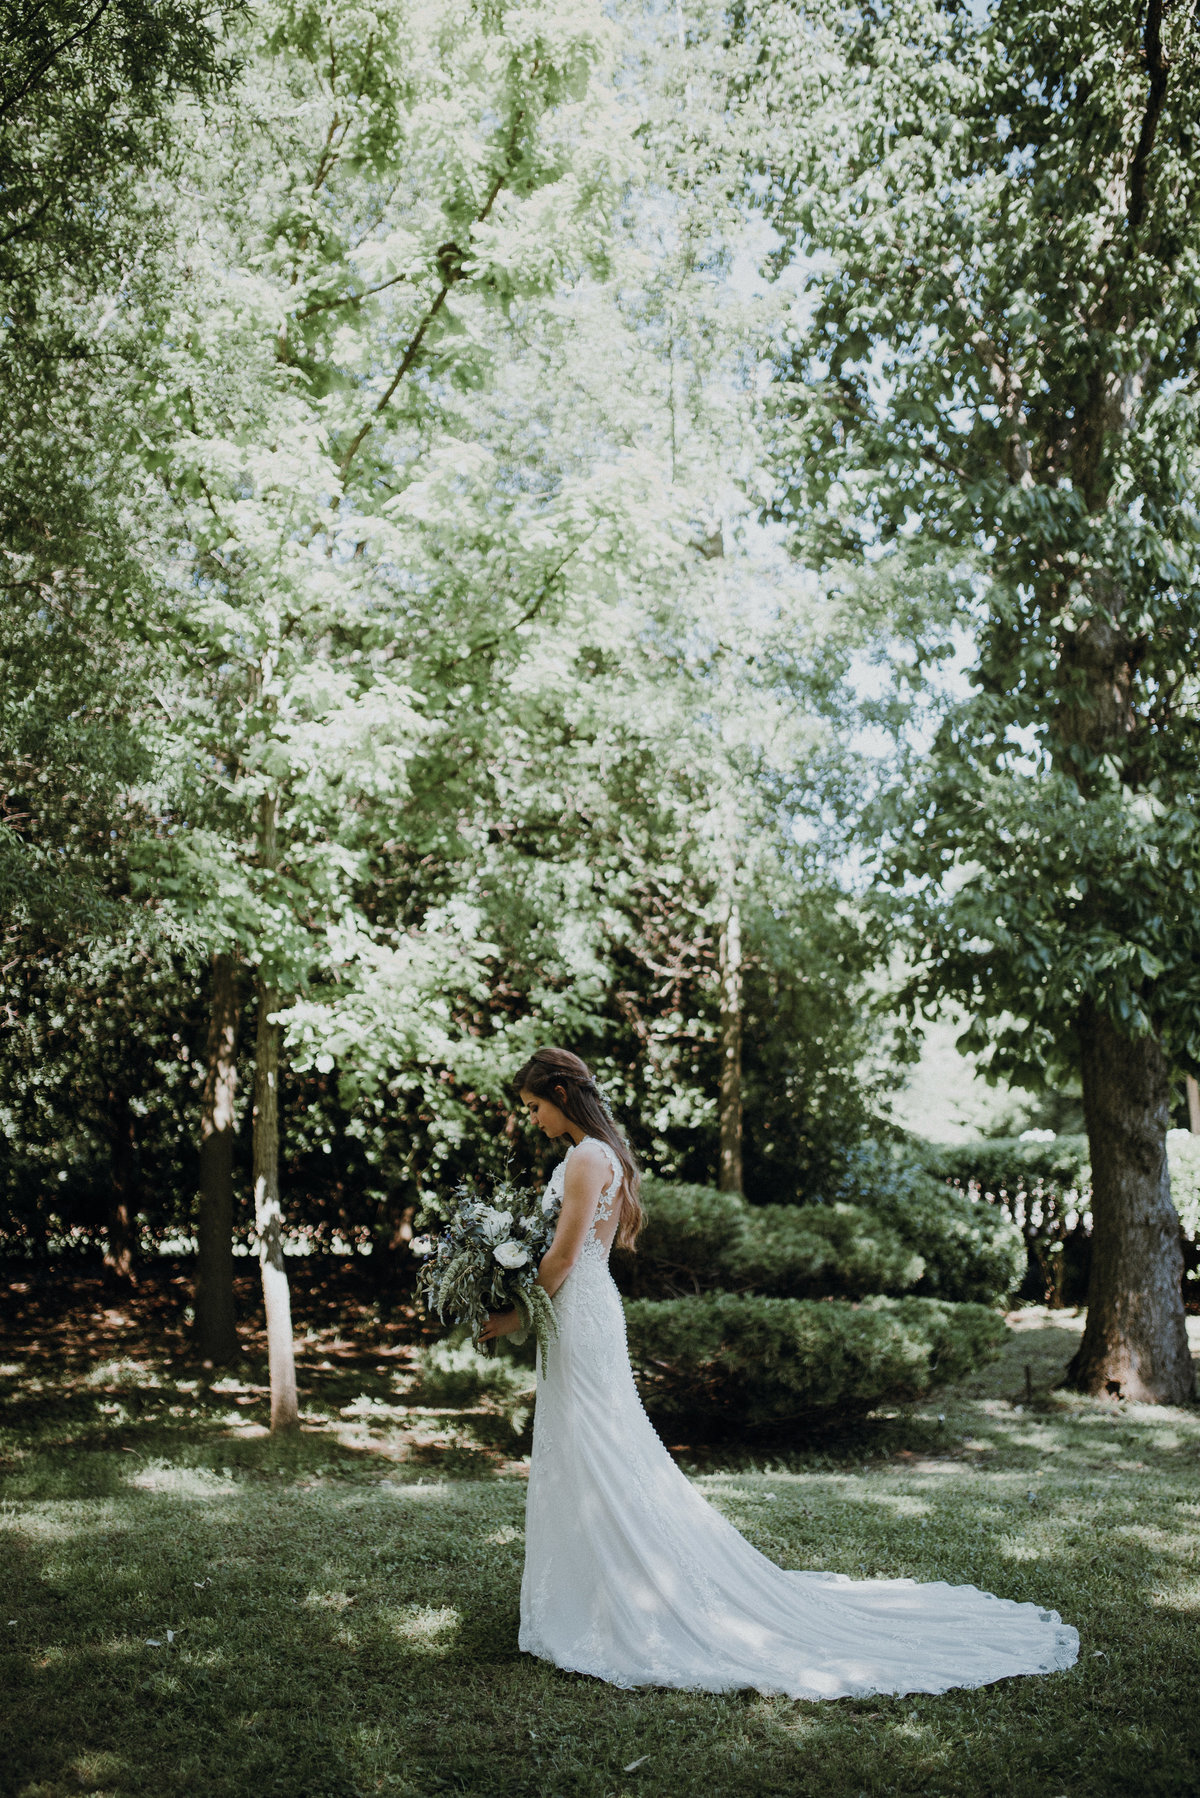 Bride's portrait just before she walks down the aisle at her beautiful Arkansas wedding at Adams Estate